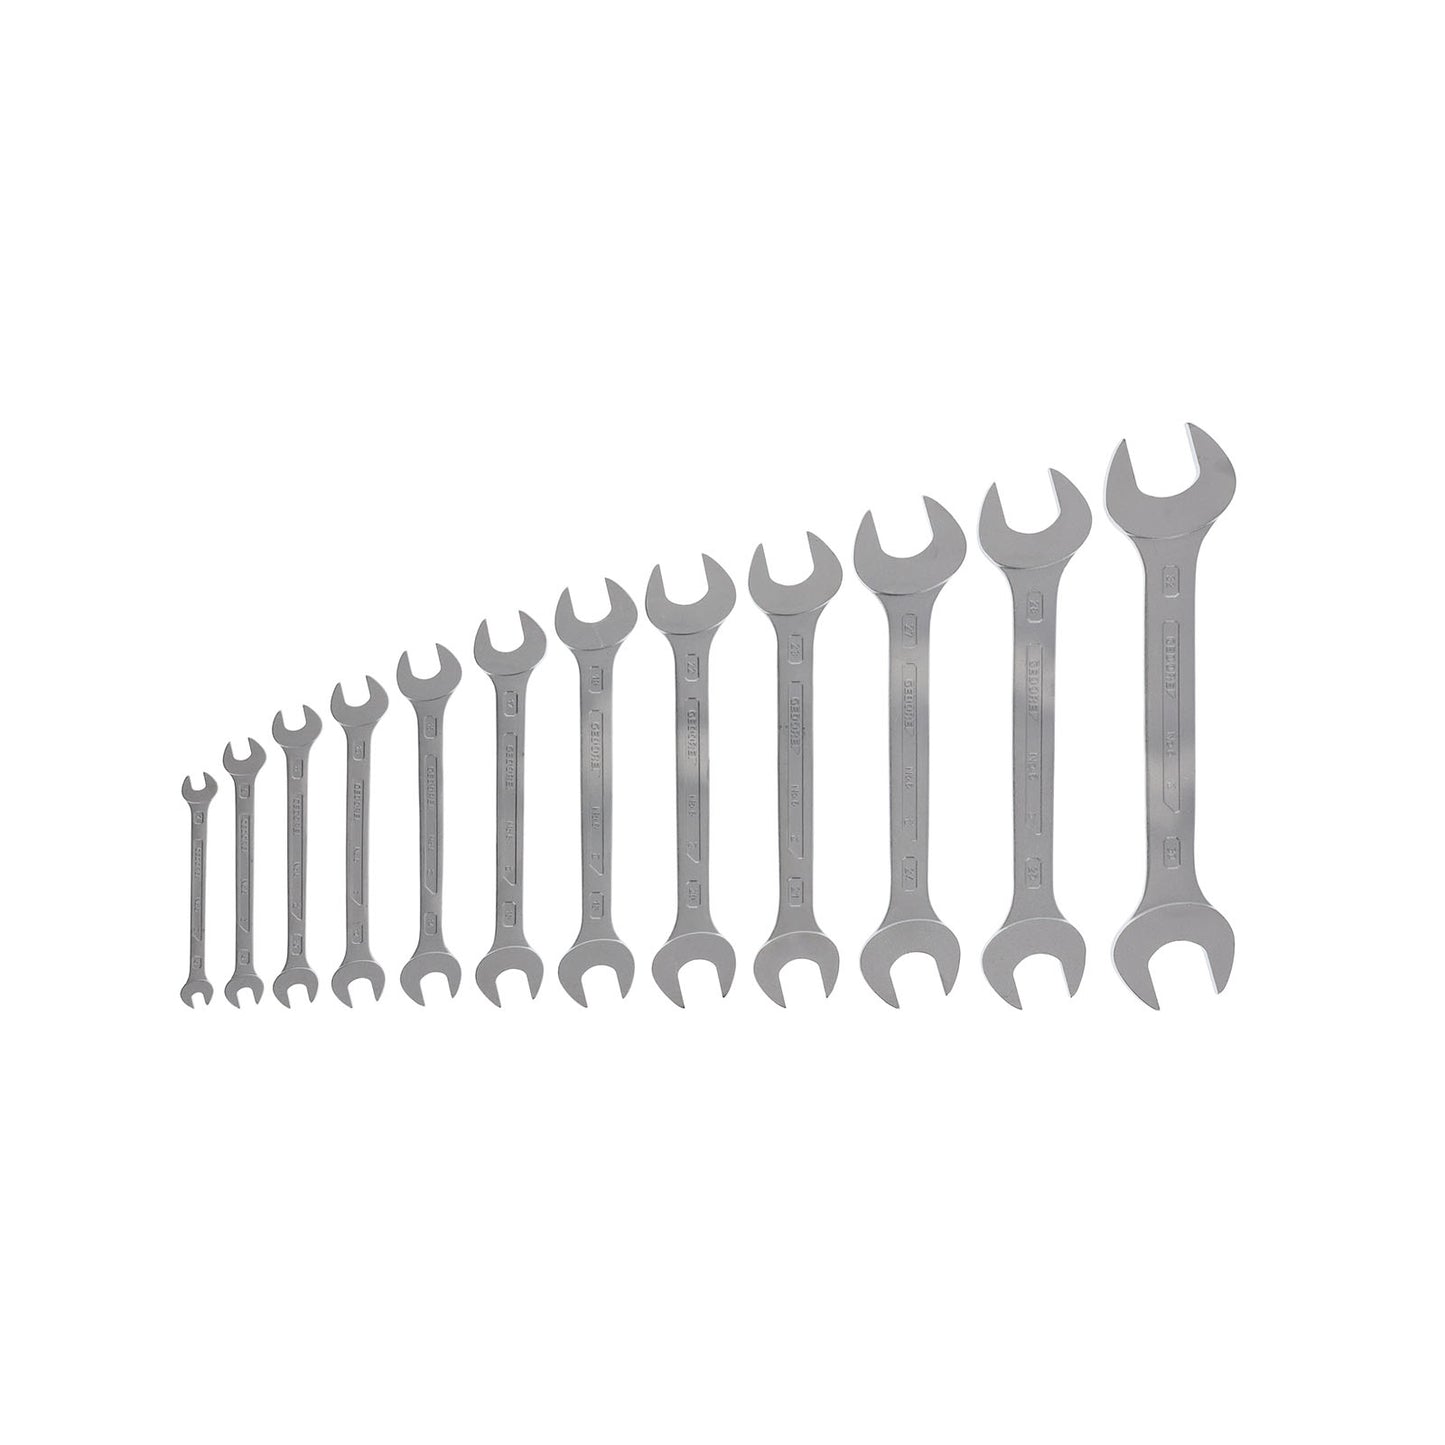 GEDORE 6-120 - Set of 12 2-Mount Fixed Wrenches (6077890)